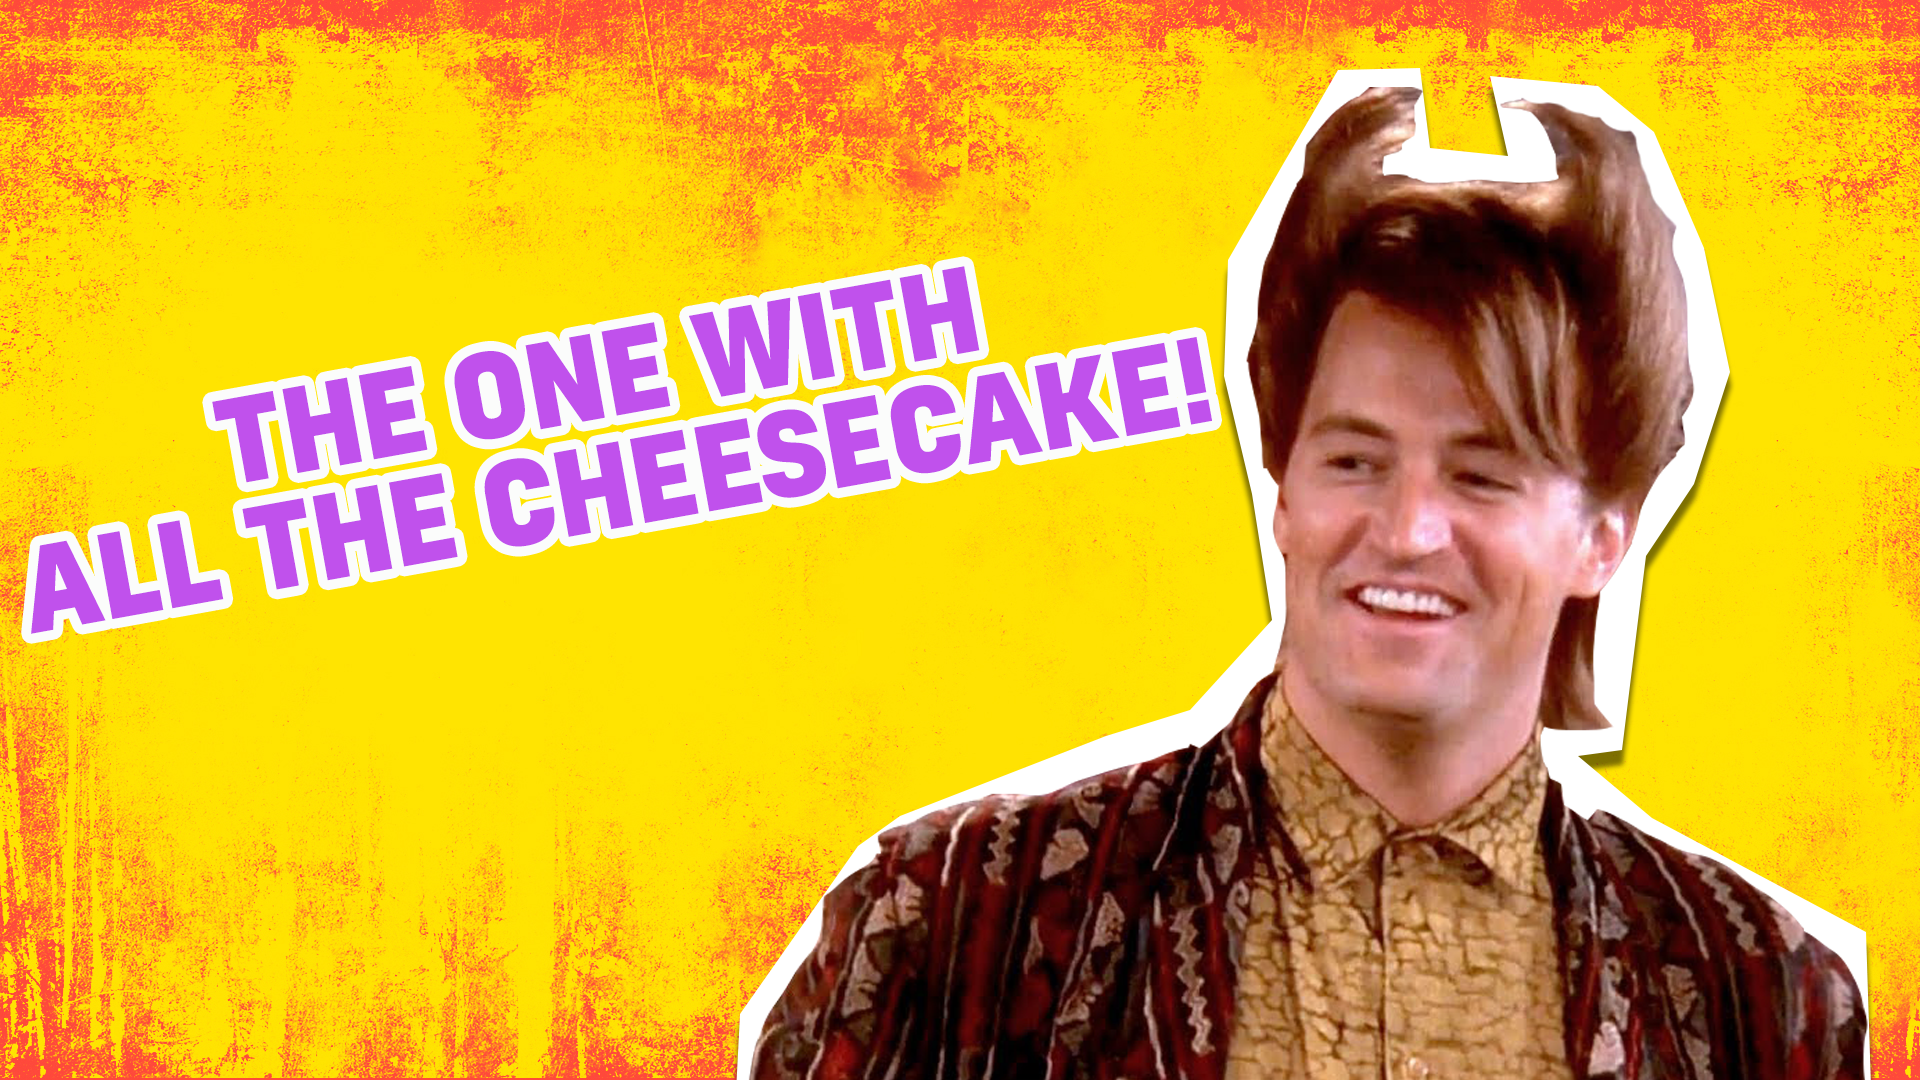 Maybe you were just hungry when you did this quiz, but its The One With all the Cheesecake for you! Come on, admit it, if you found a cheesecake, you'd do it too!